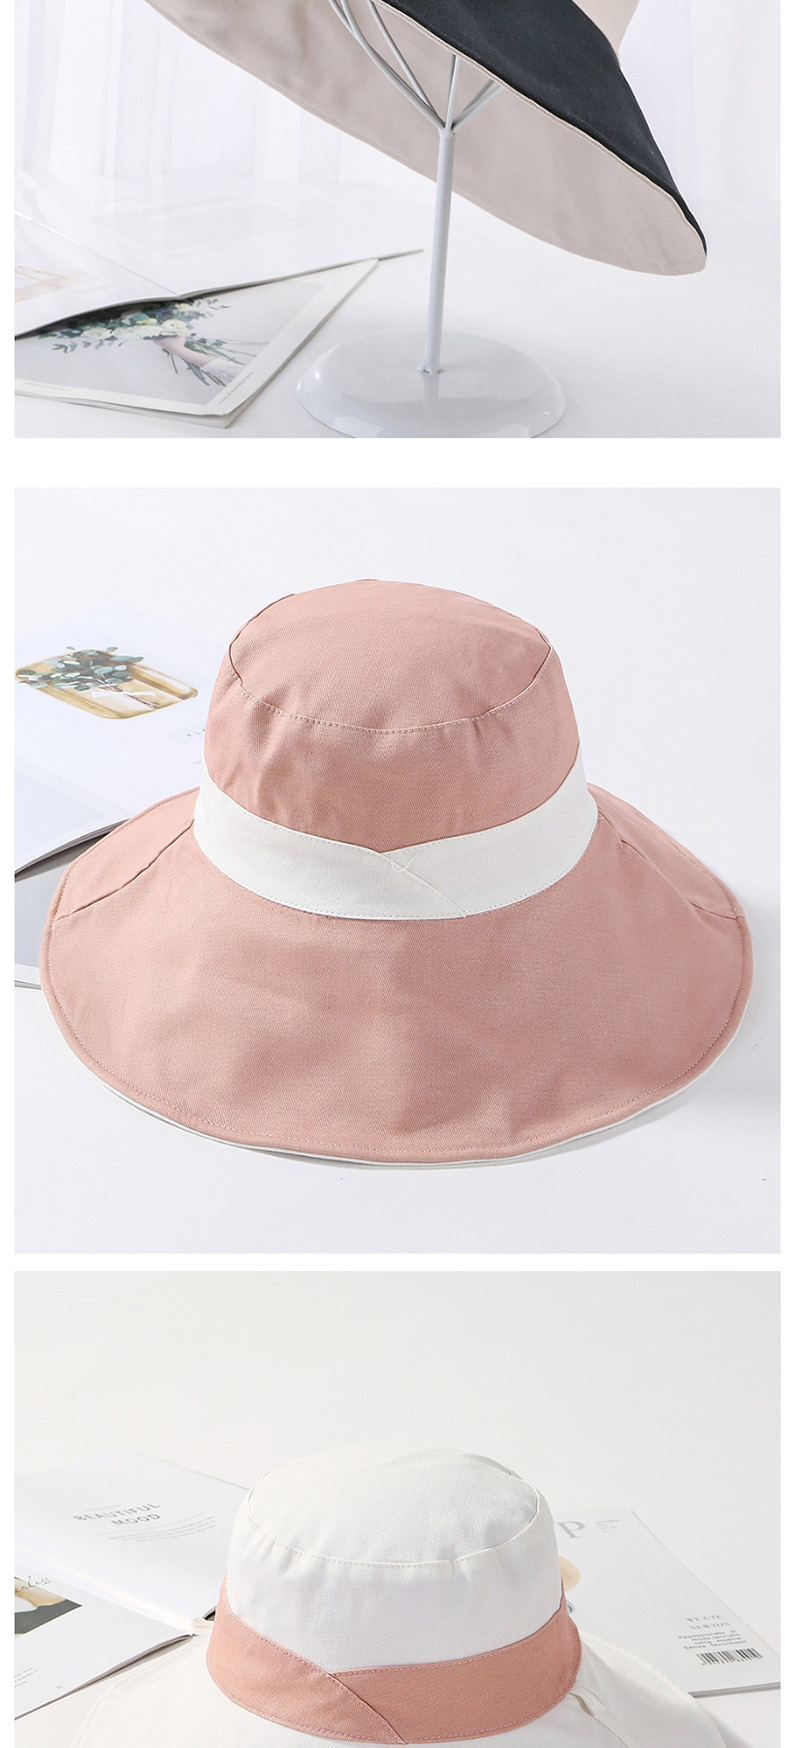 Fashion Yellow Cotton Large Double-sided Color Matching Patch Fisherman Hat,Sun Hats